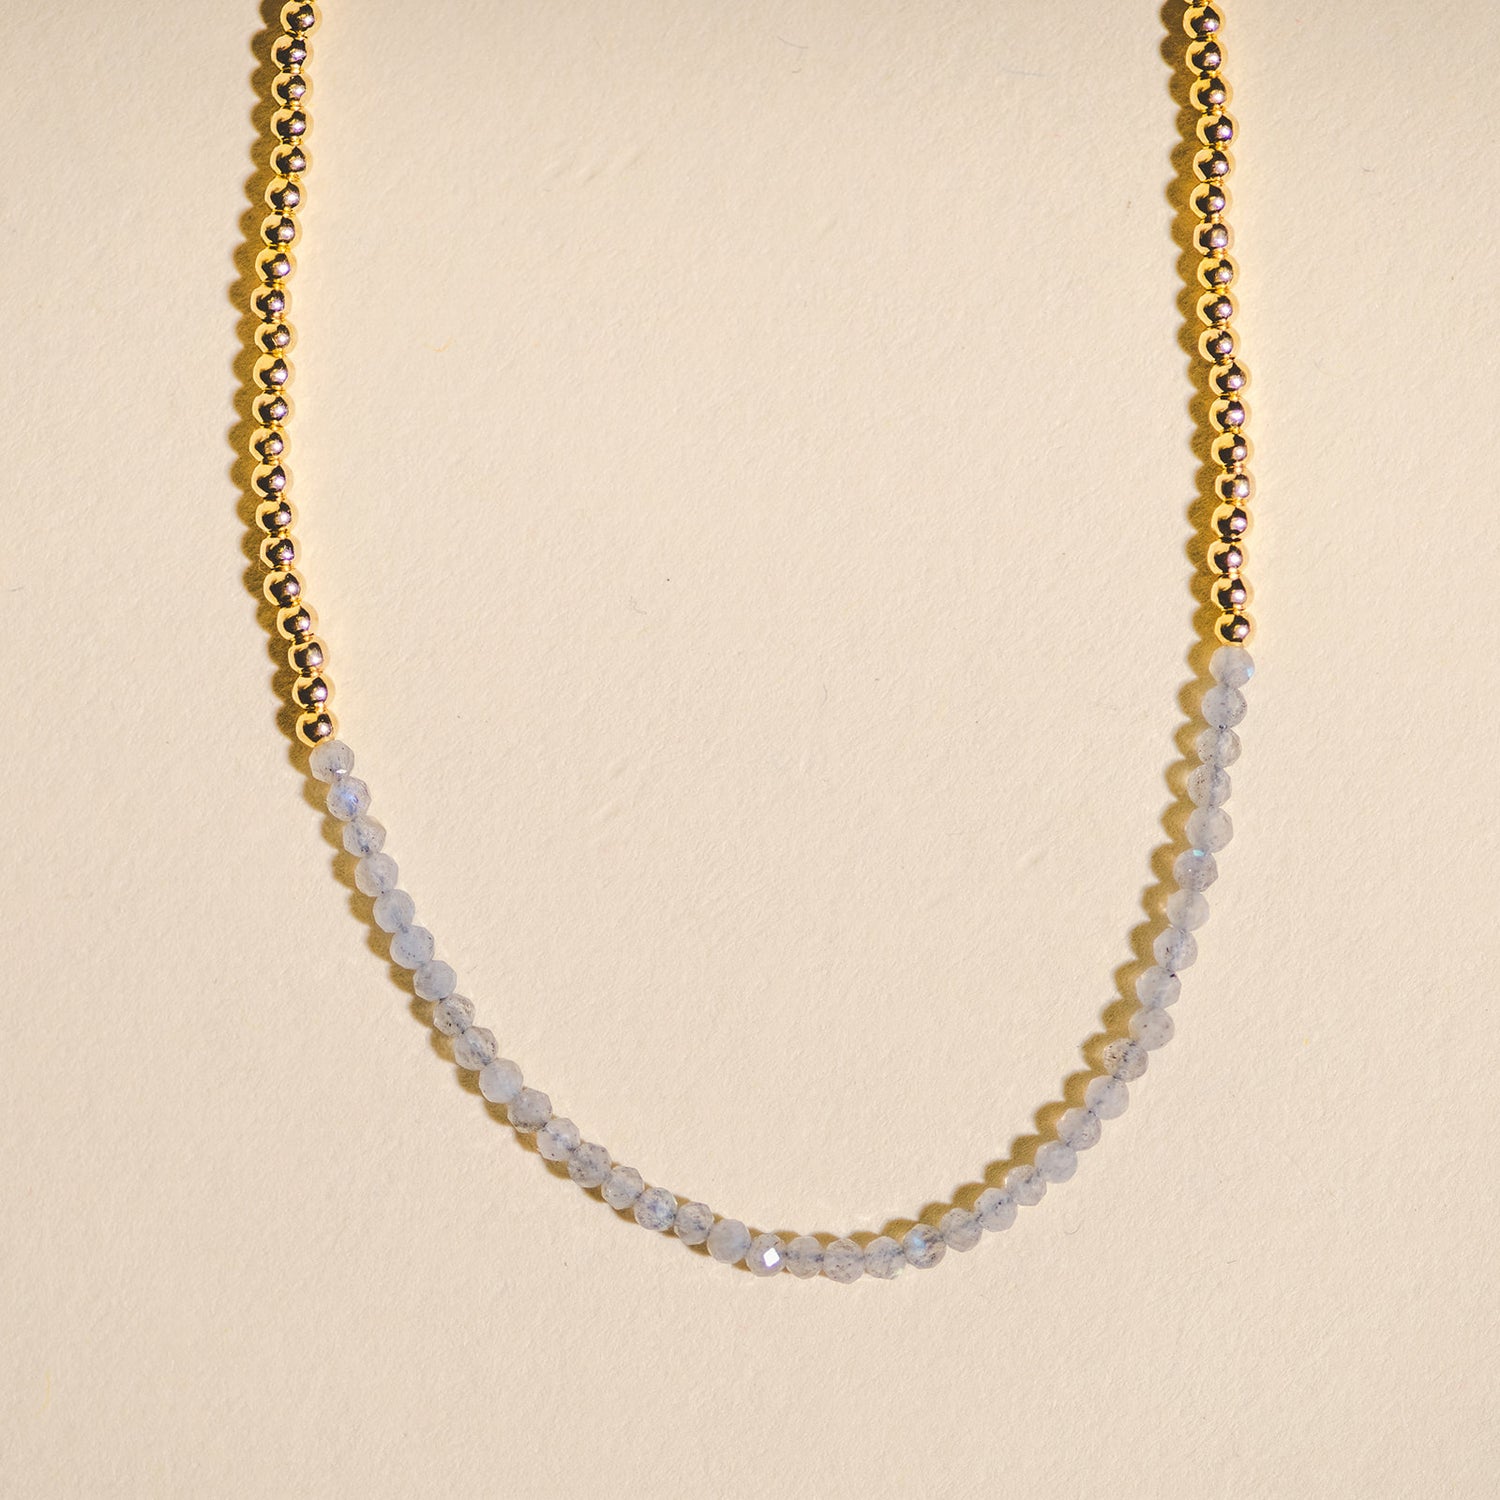 Beaded Crystal Necklace - Gold with Labradorite